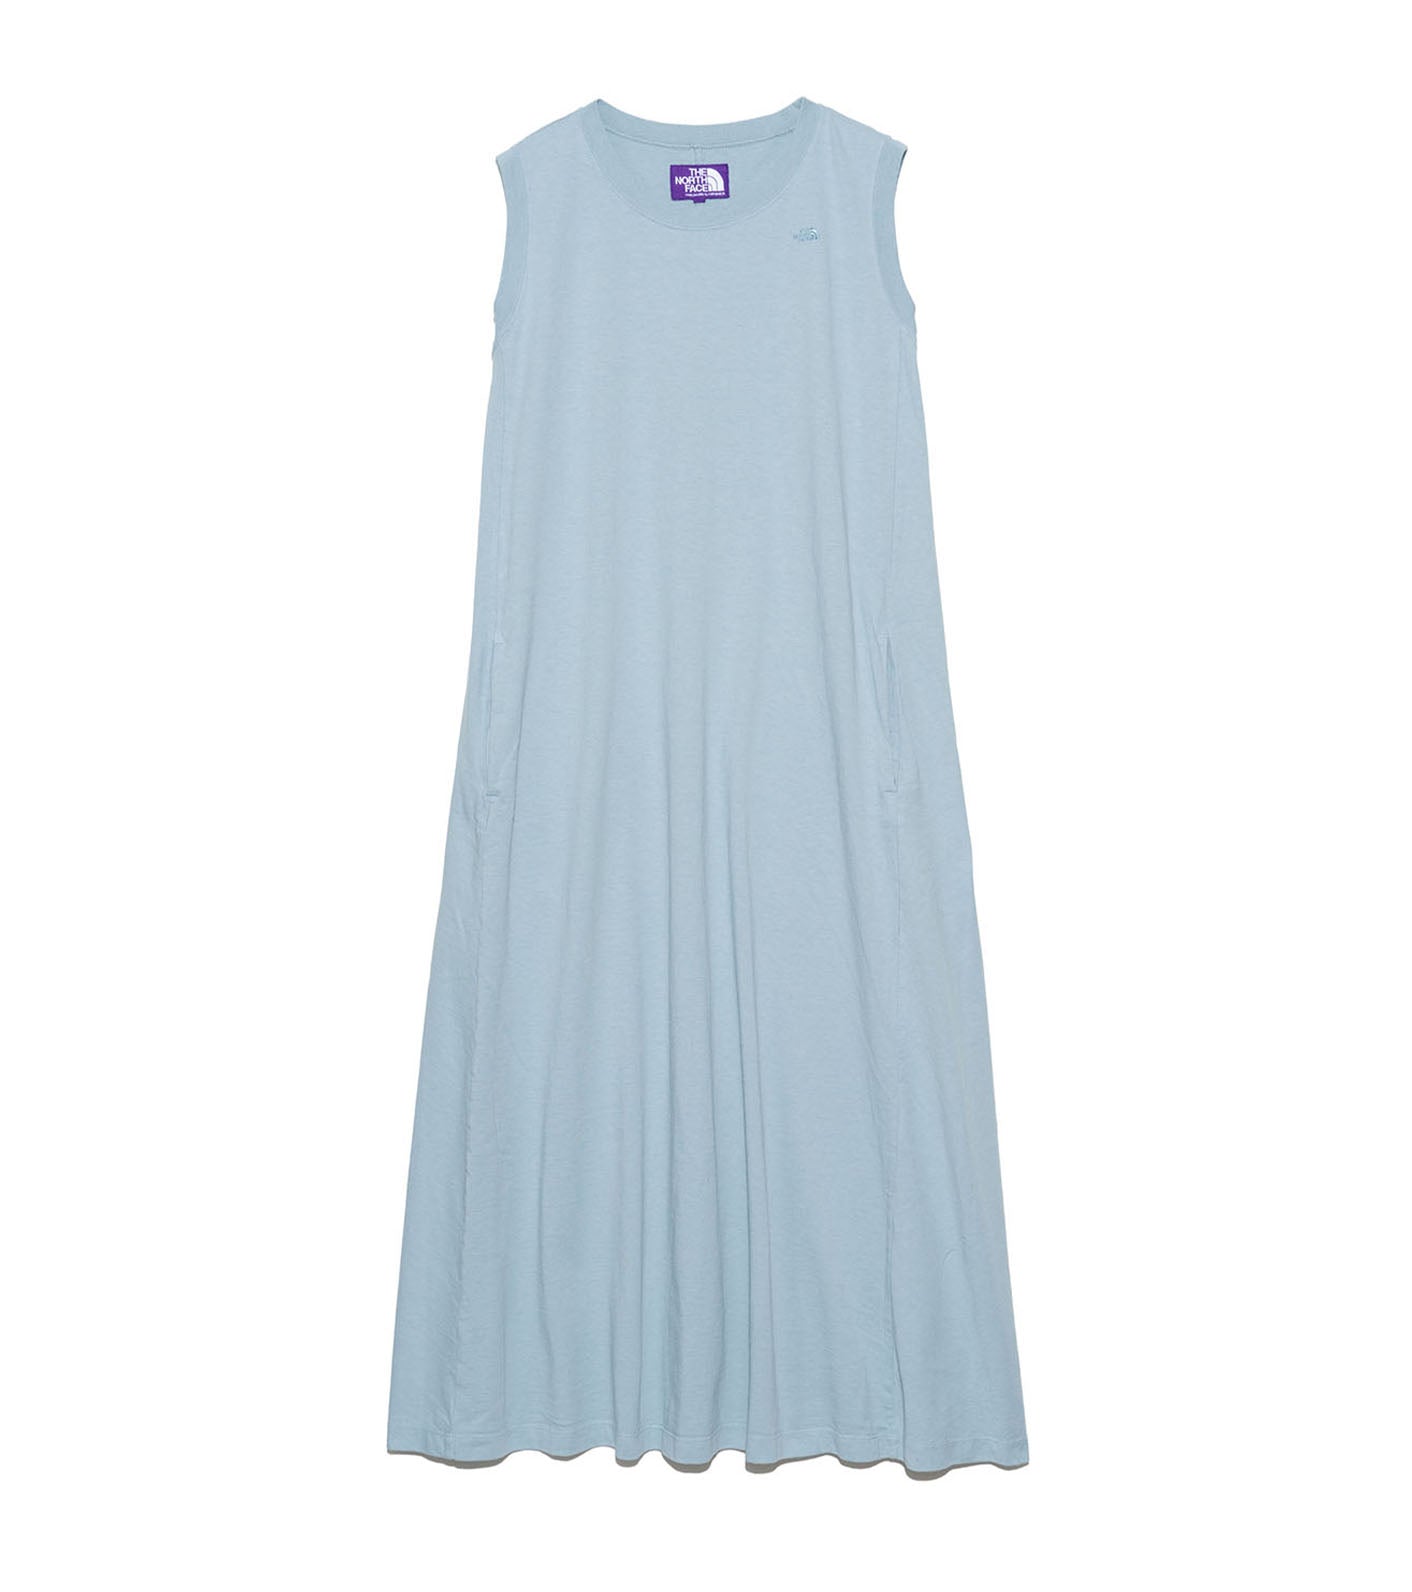 THE NORTH FACE PURPLE LABEL 5.5oz Sleeveless Flared Dress